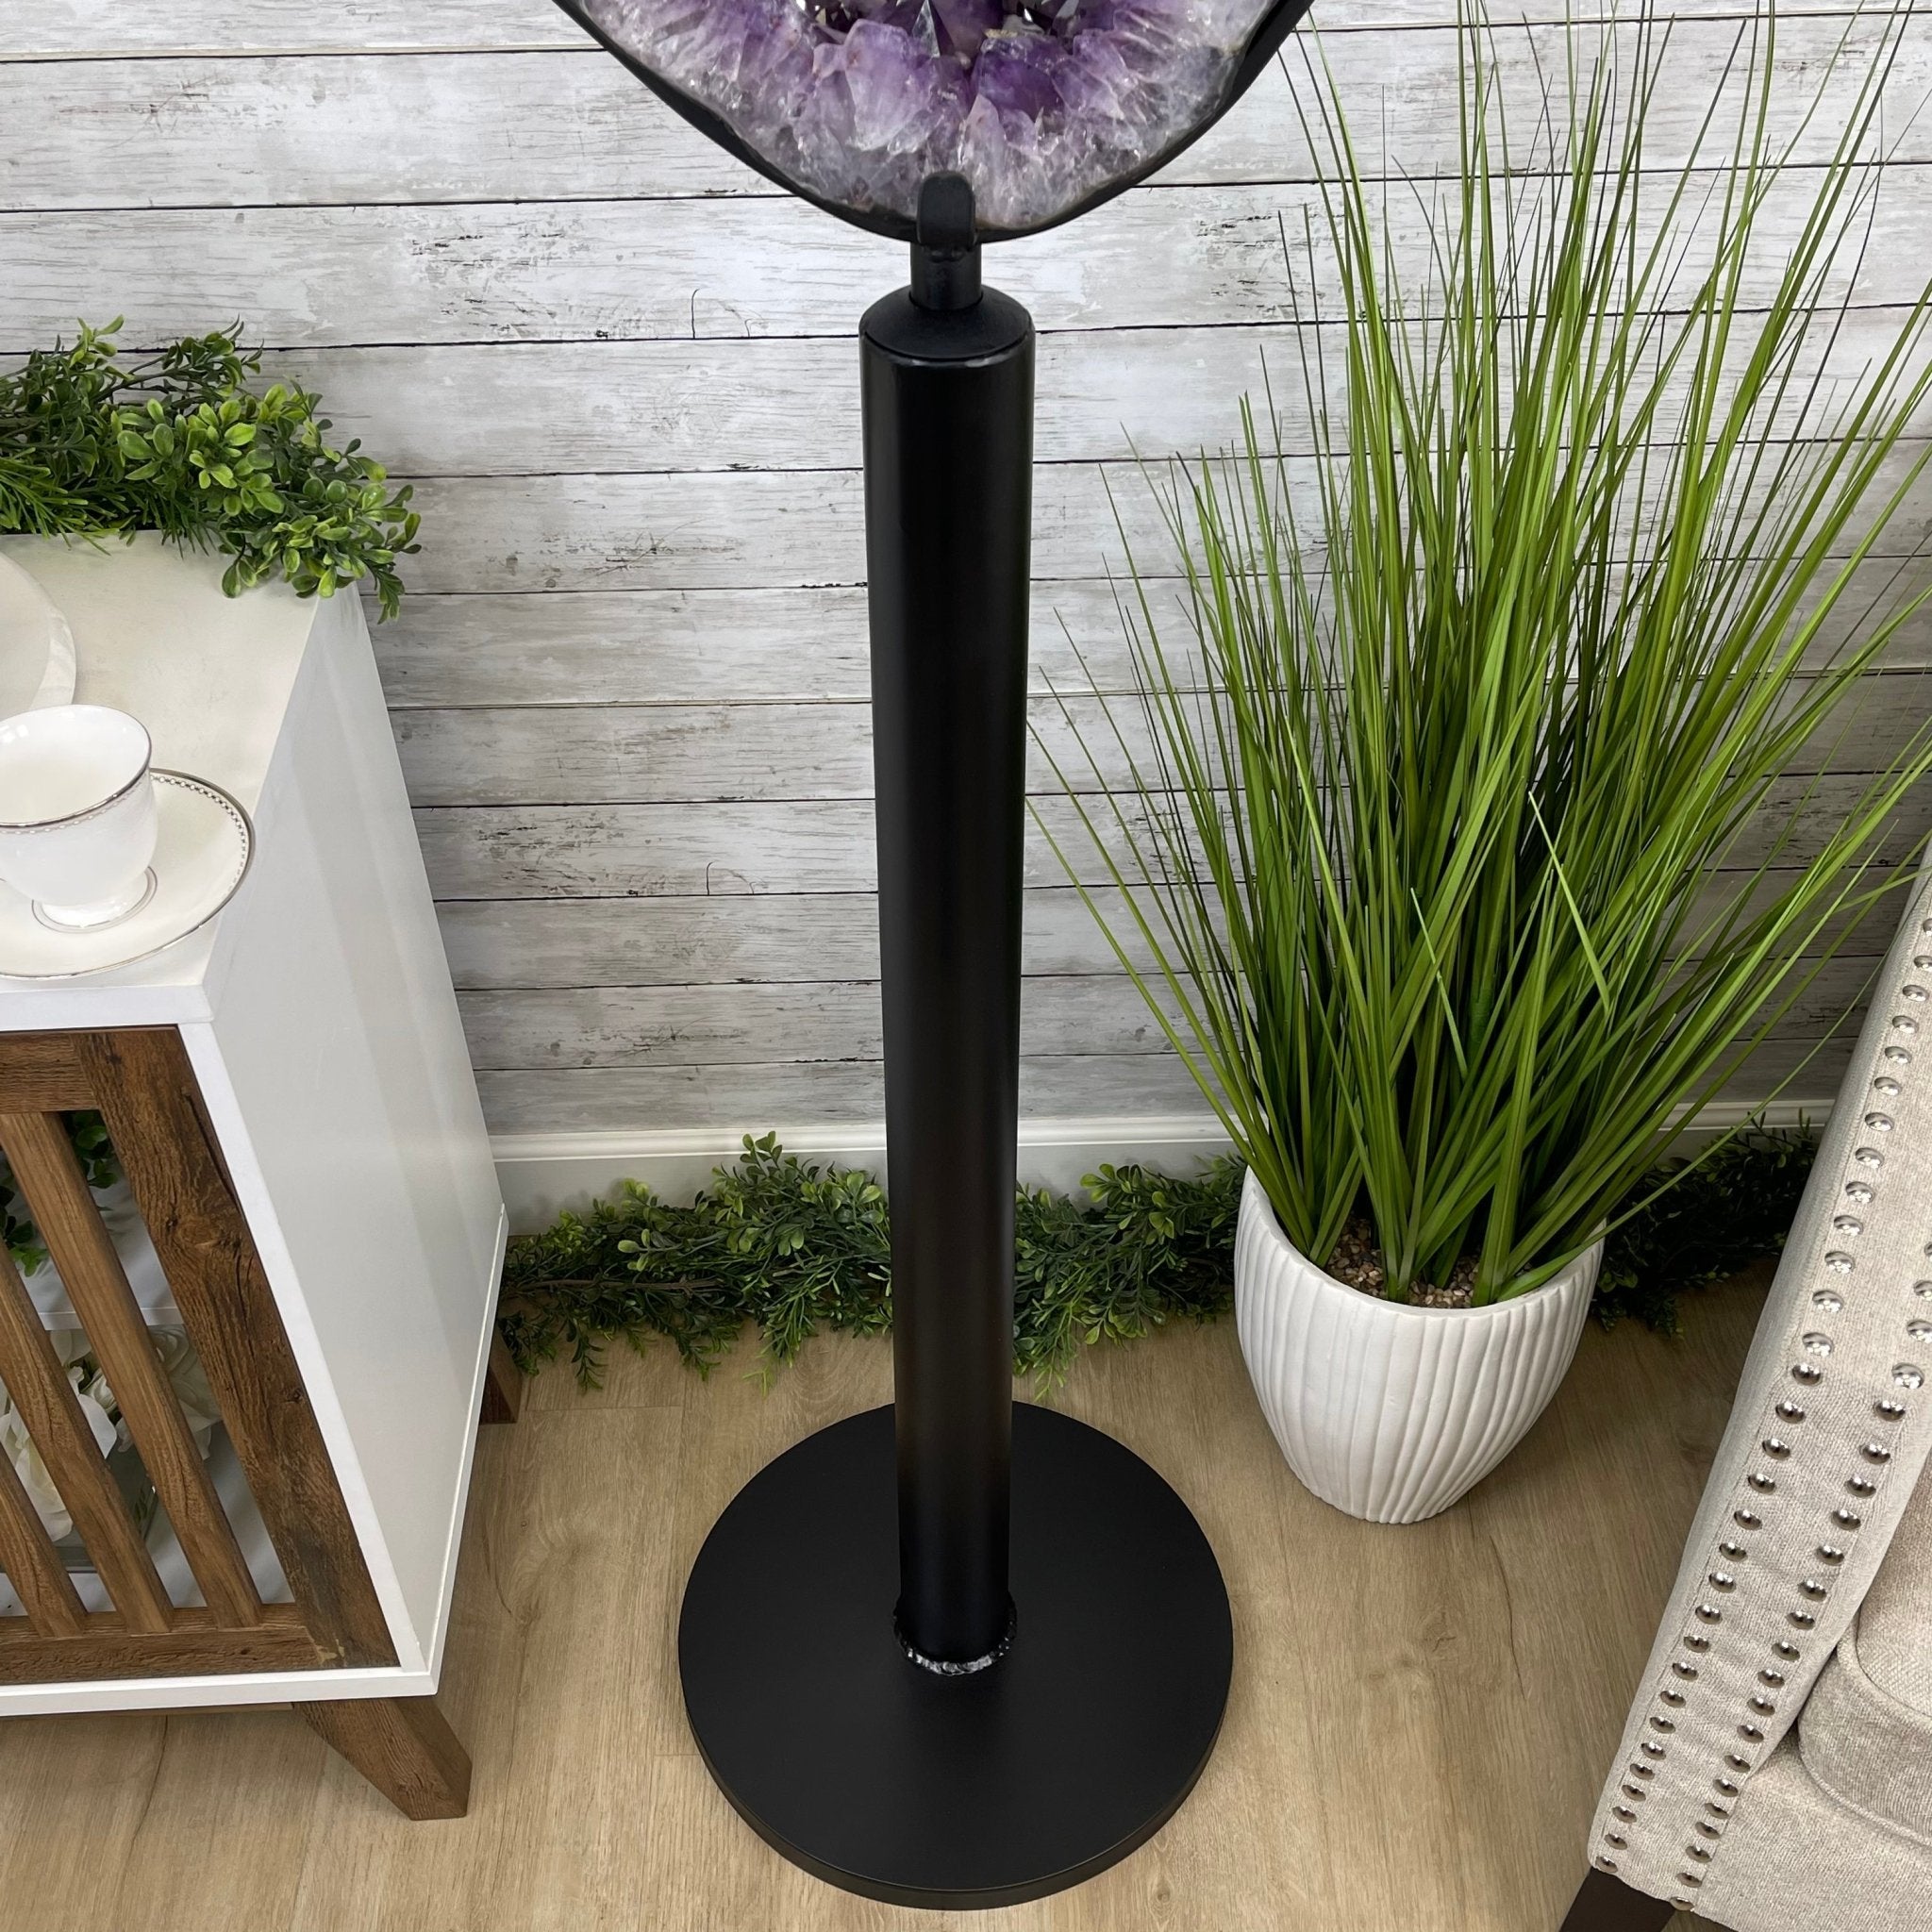 Super Quality Brazilian Amethyst Crystal Portal on a Tall Rotating Stand, 114.7 lbs & 70.5" tall Model #5604-0101 by Brazil Gems - Brazil GemsBrazil GemsSuper Quality Brazilian Amethyst Crystal Portal on a Tall Rotating Stand, 114.7 lbs & 70.5" tall Model #5604-0101 by Brazil GemsPortals on Rotating Bases5604-0101